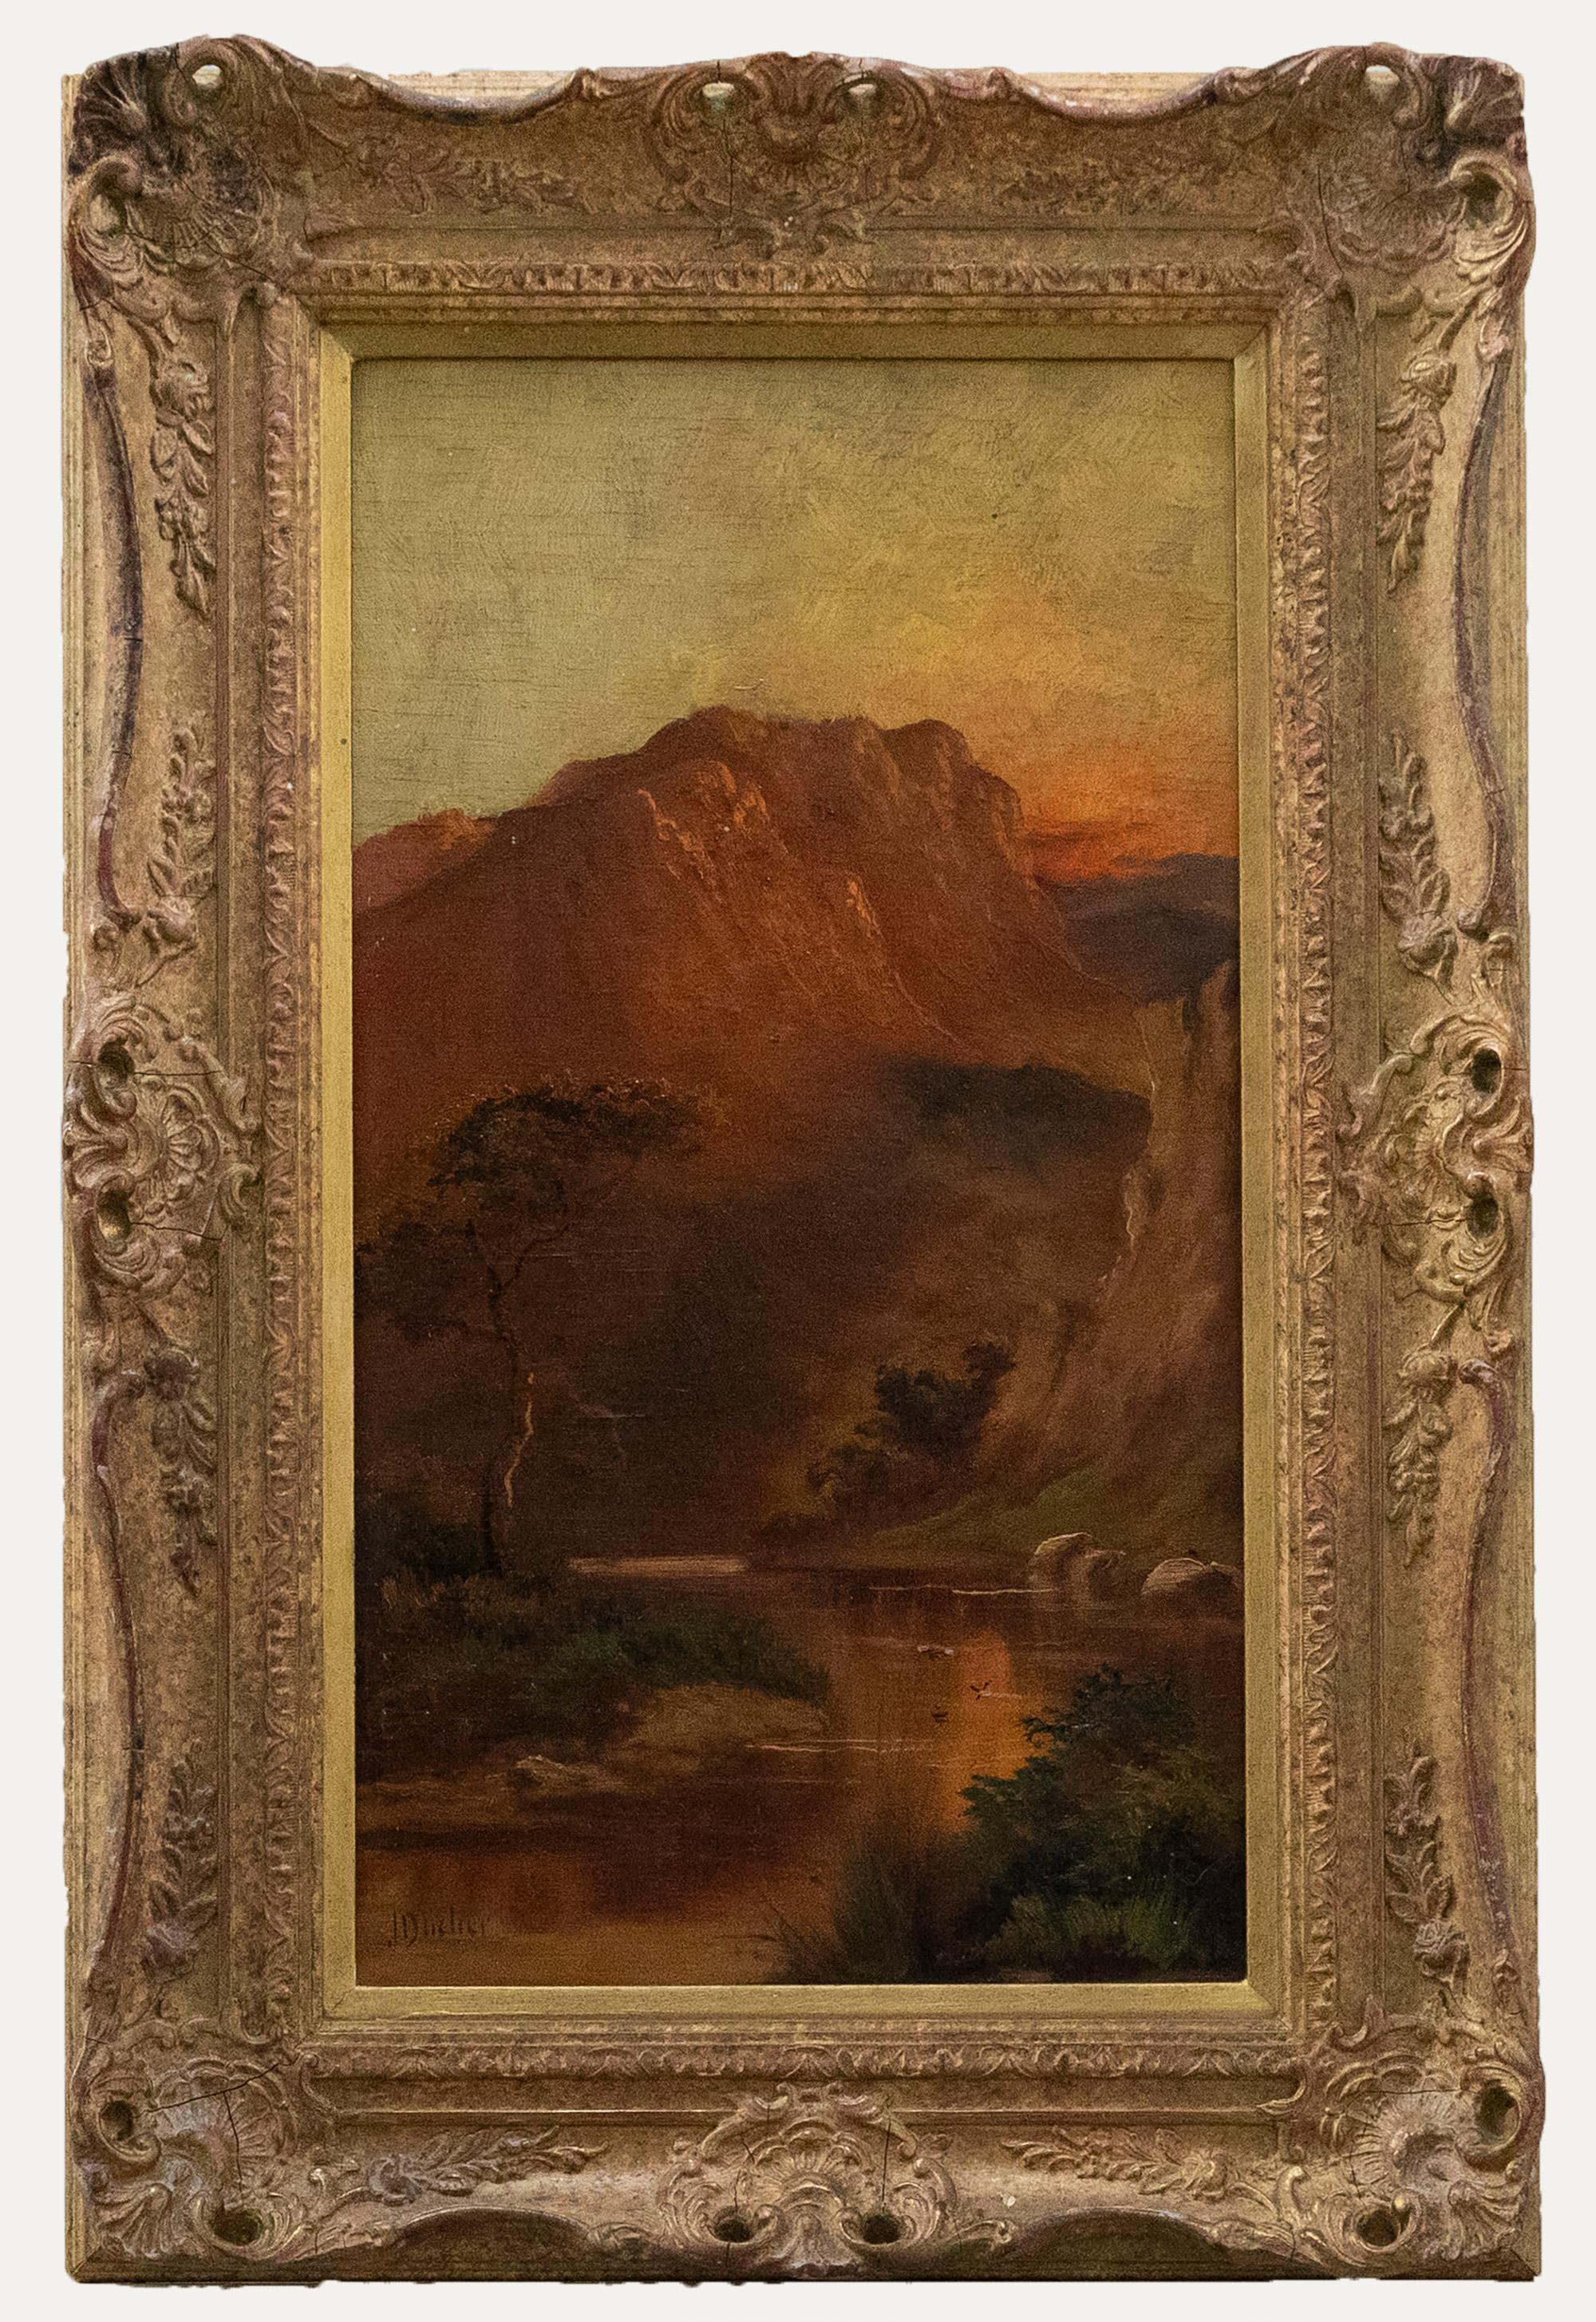 Unknown Landscape Painting - Jack M. Ducker (fl. 1910-1930) - Framed Early 20th Century Oil, An Orange Sunset